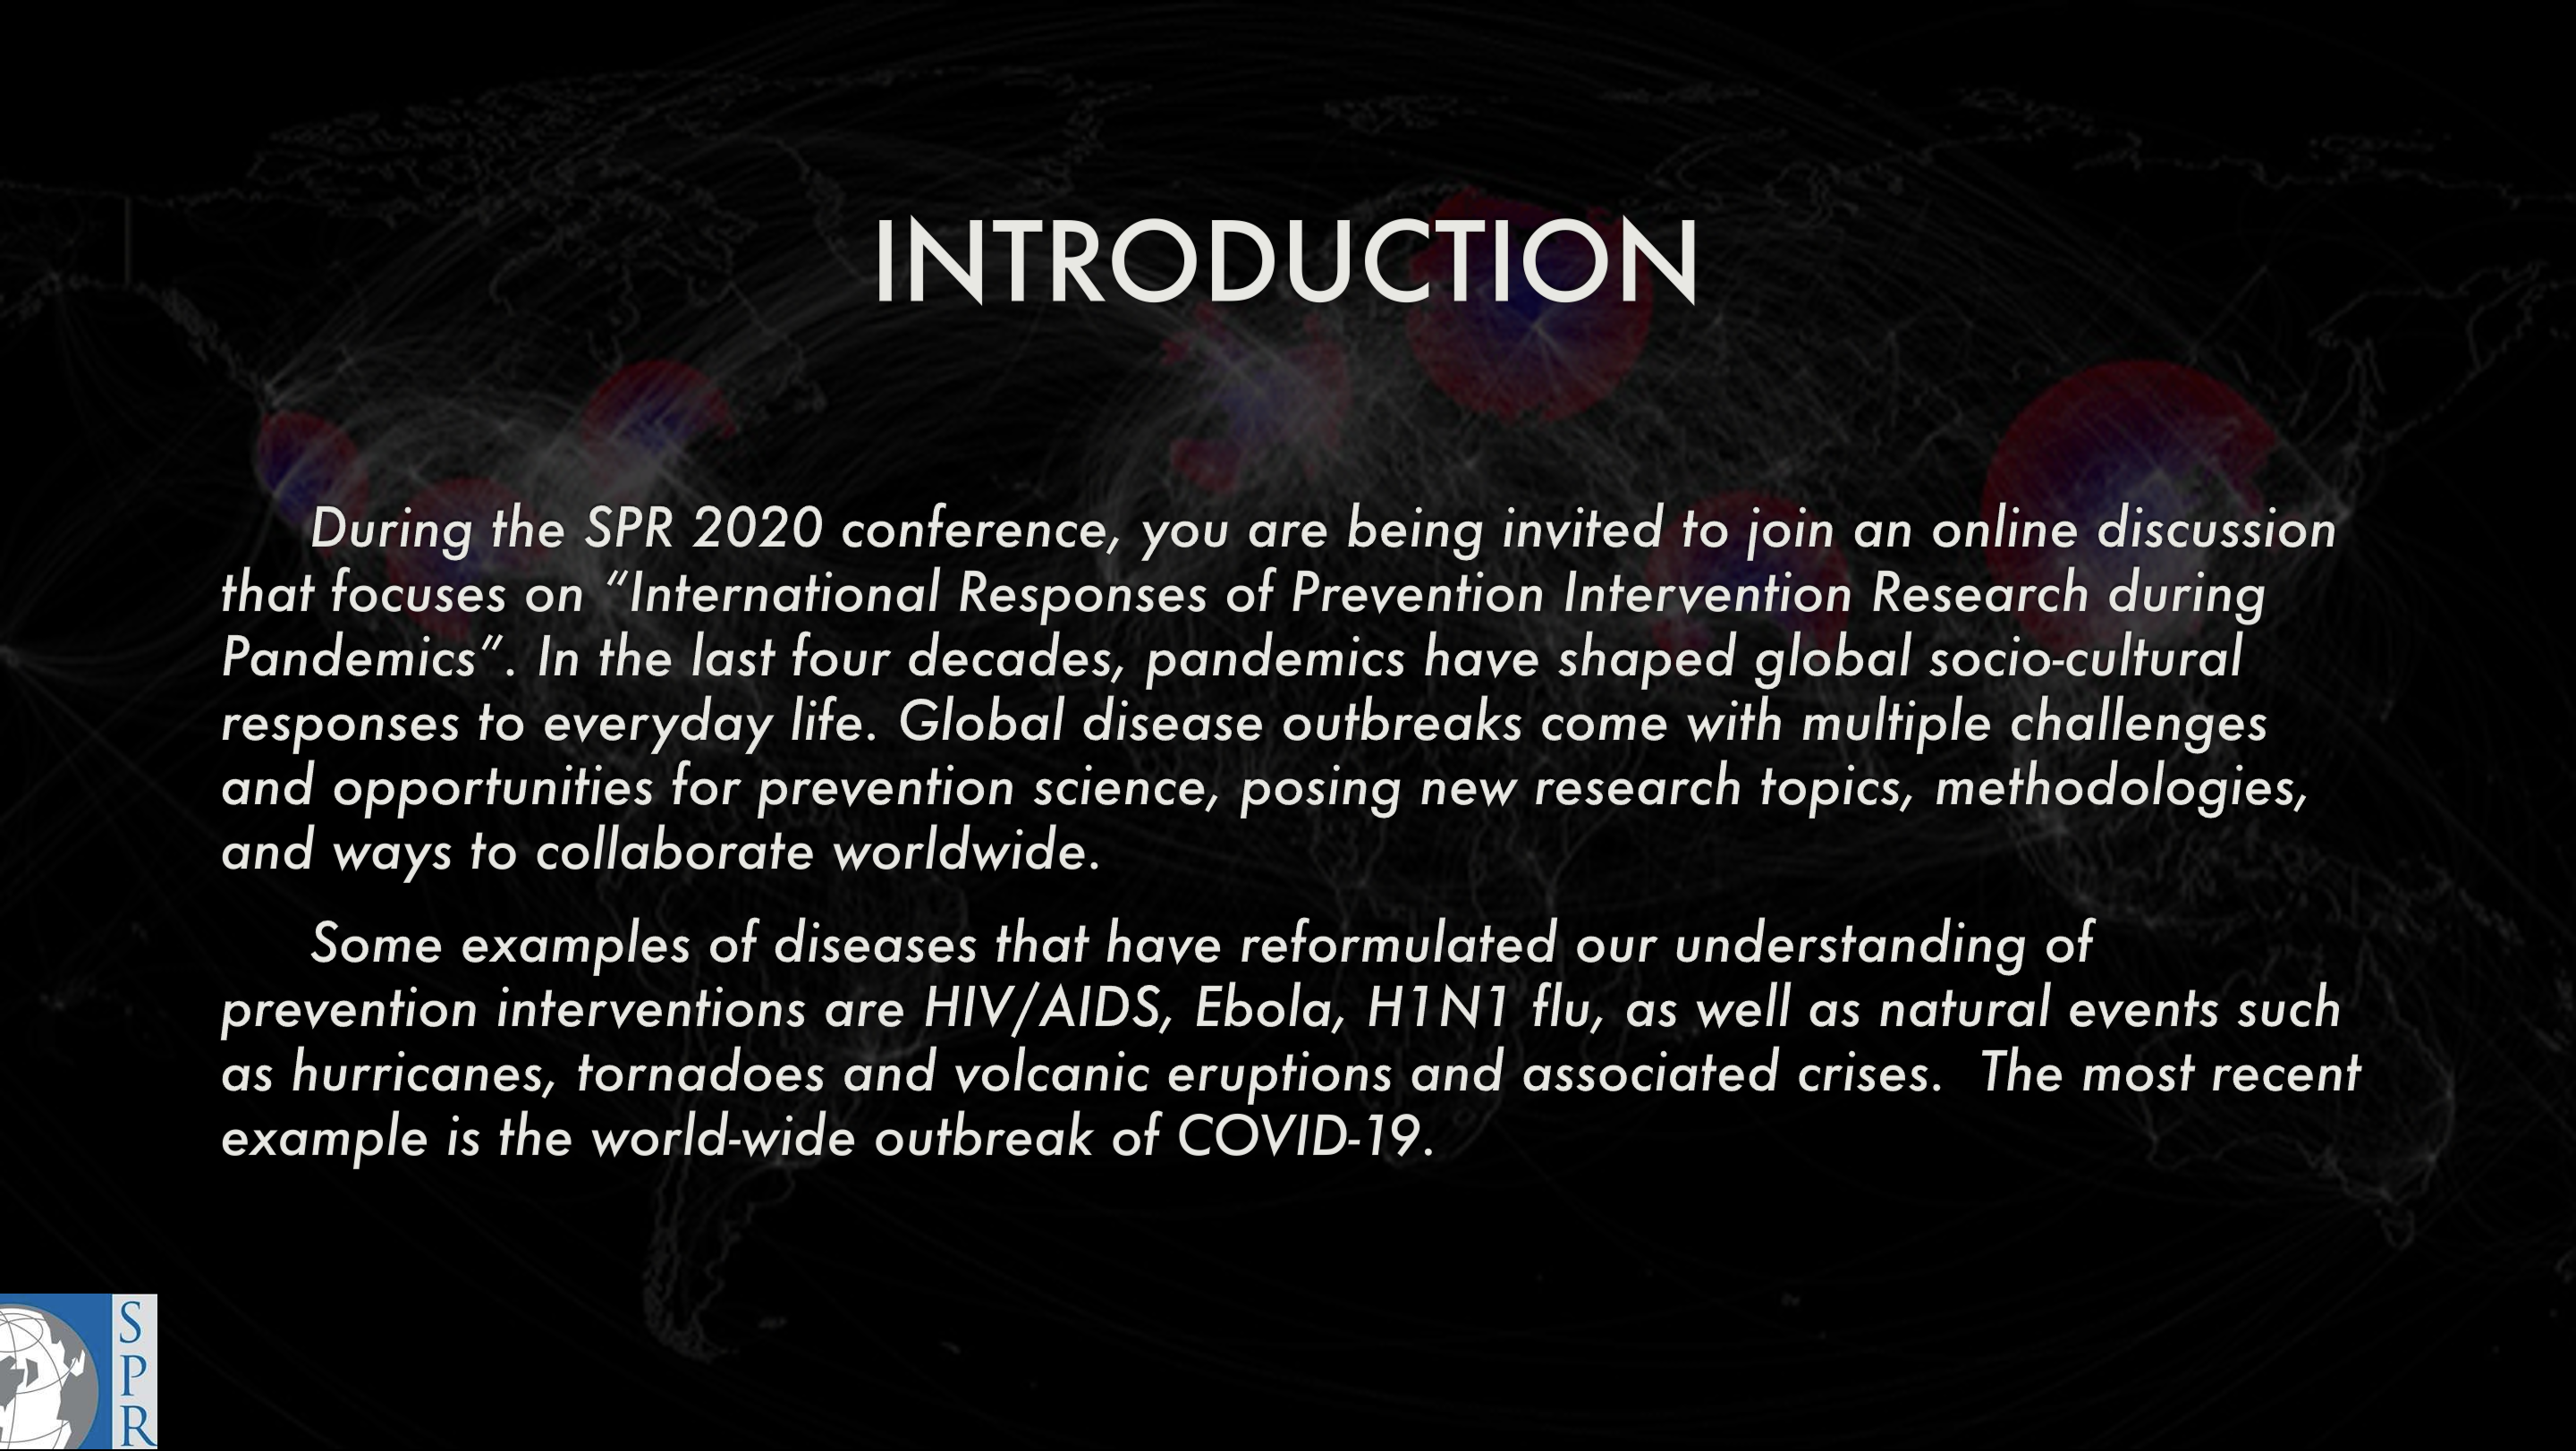 SPR 2020 INF DISCUSSIONS- “International Responses of Prevention Intervention Research during Pandemics”. 